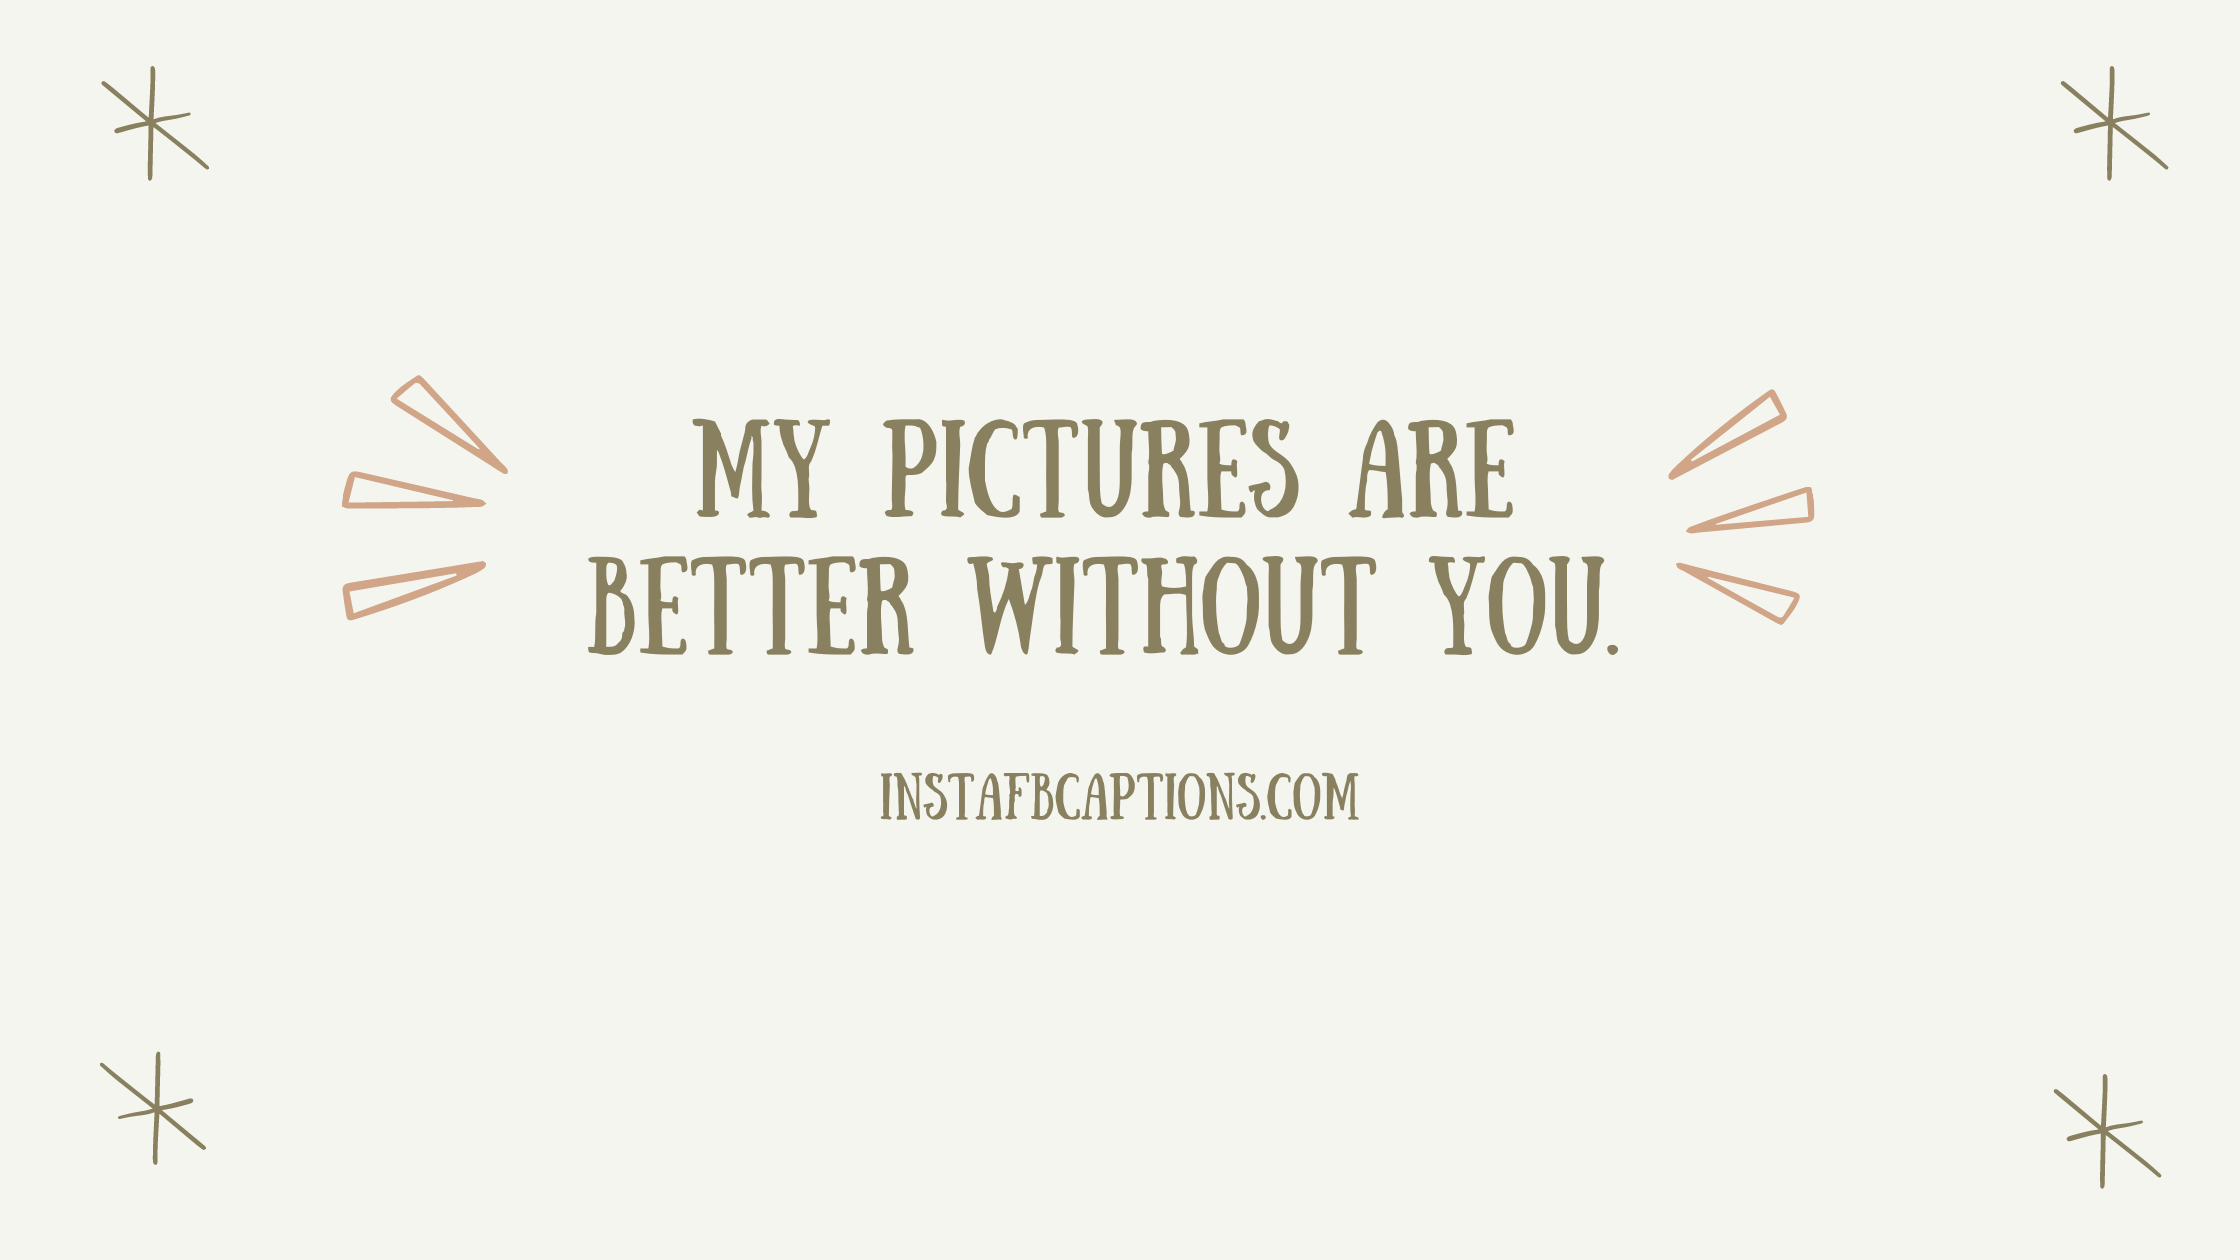 My pictures are better without you. captions to make your ex jealous - Best Captions to Make your Ex Jealous - 125 Savage Captions to Make Your Ex Feel Insecure Without You